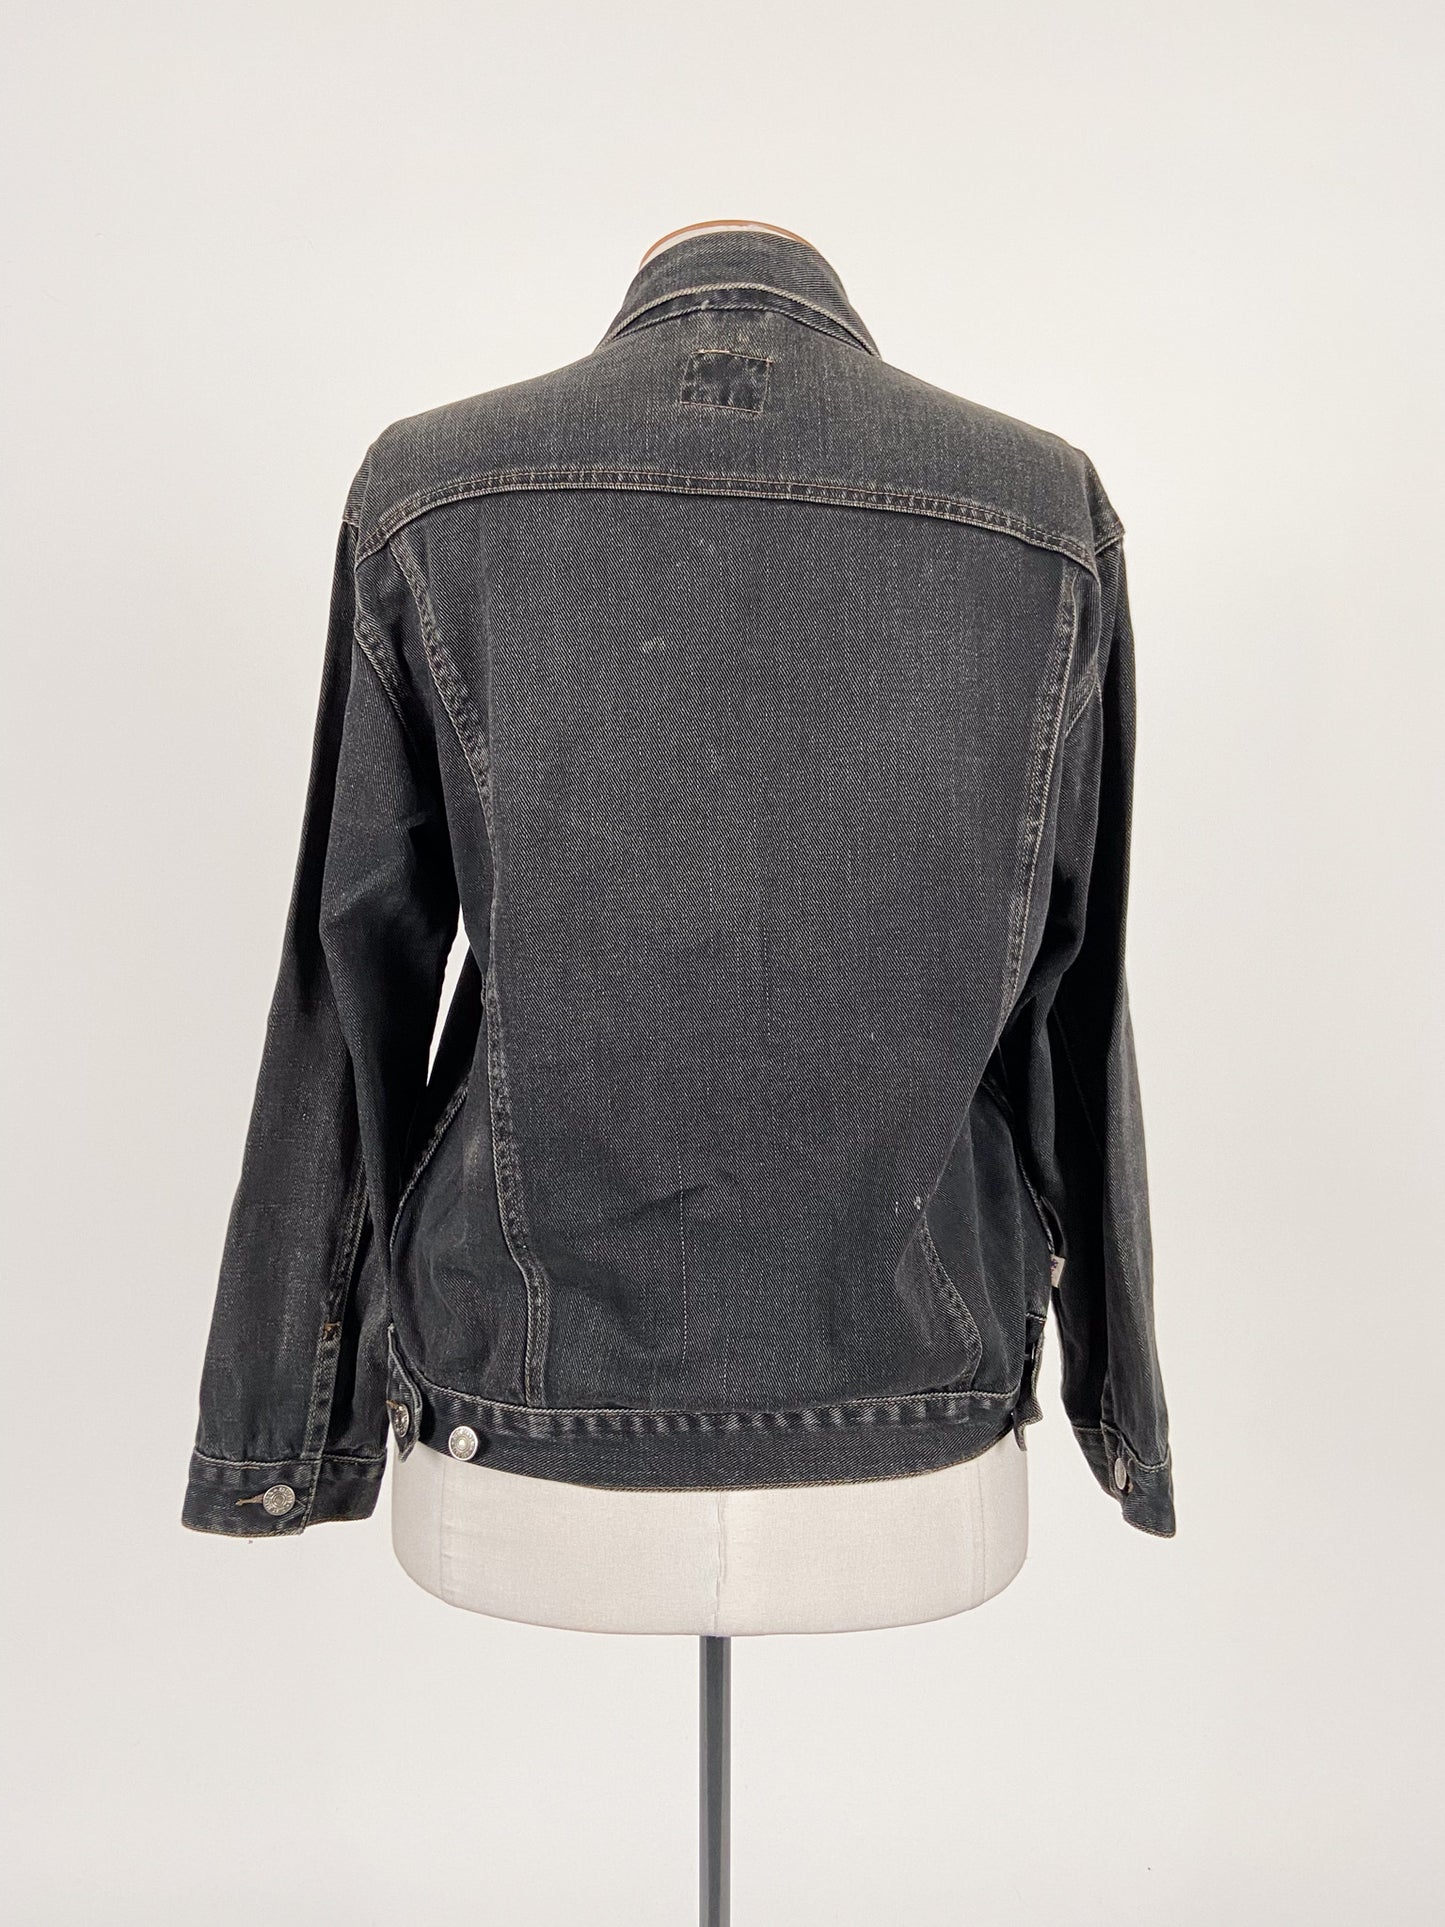 Just Jeans | Black Casual Jacket | Size S